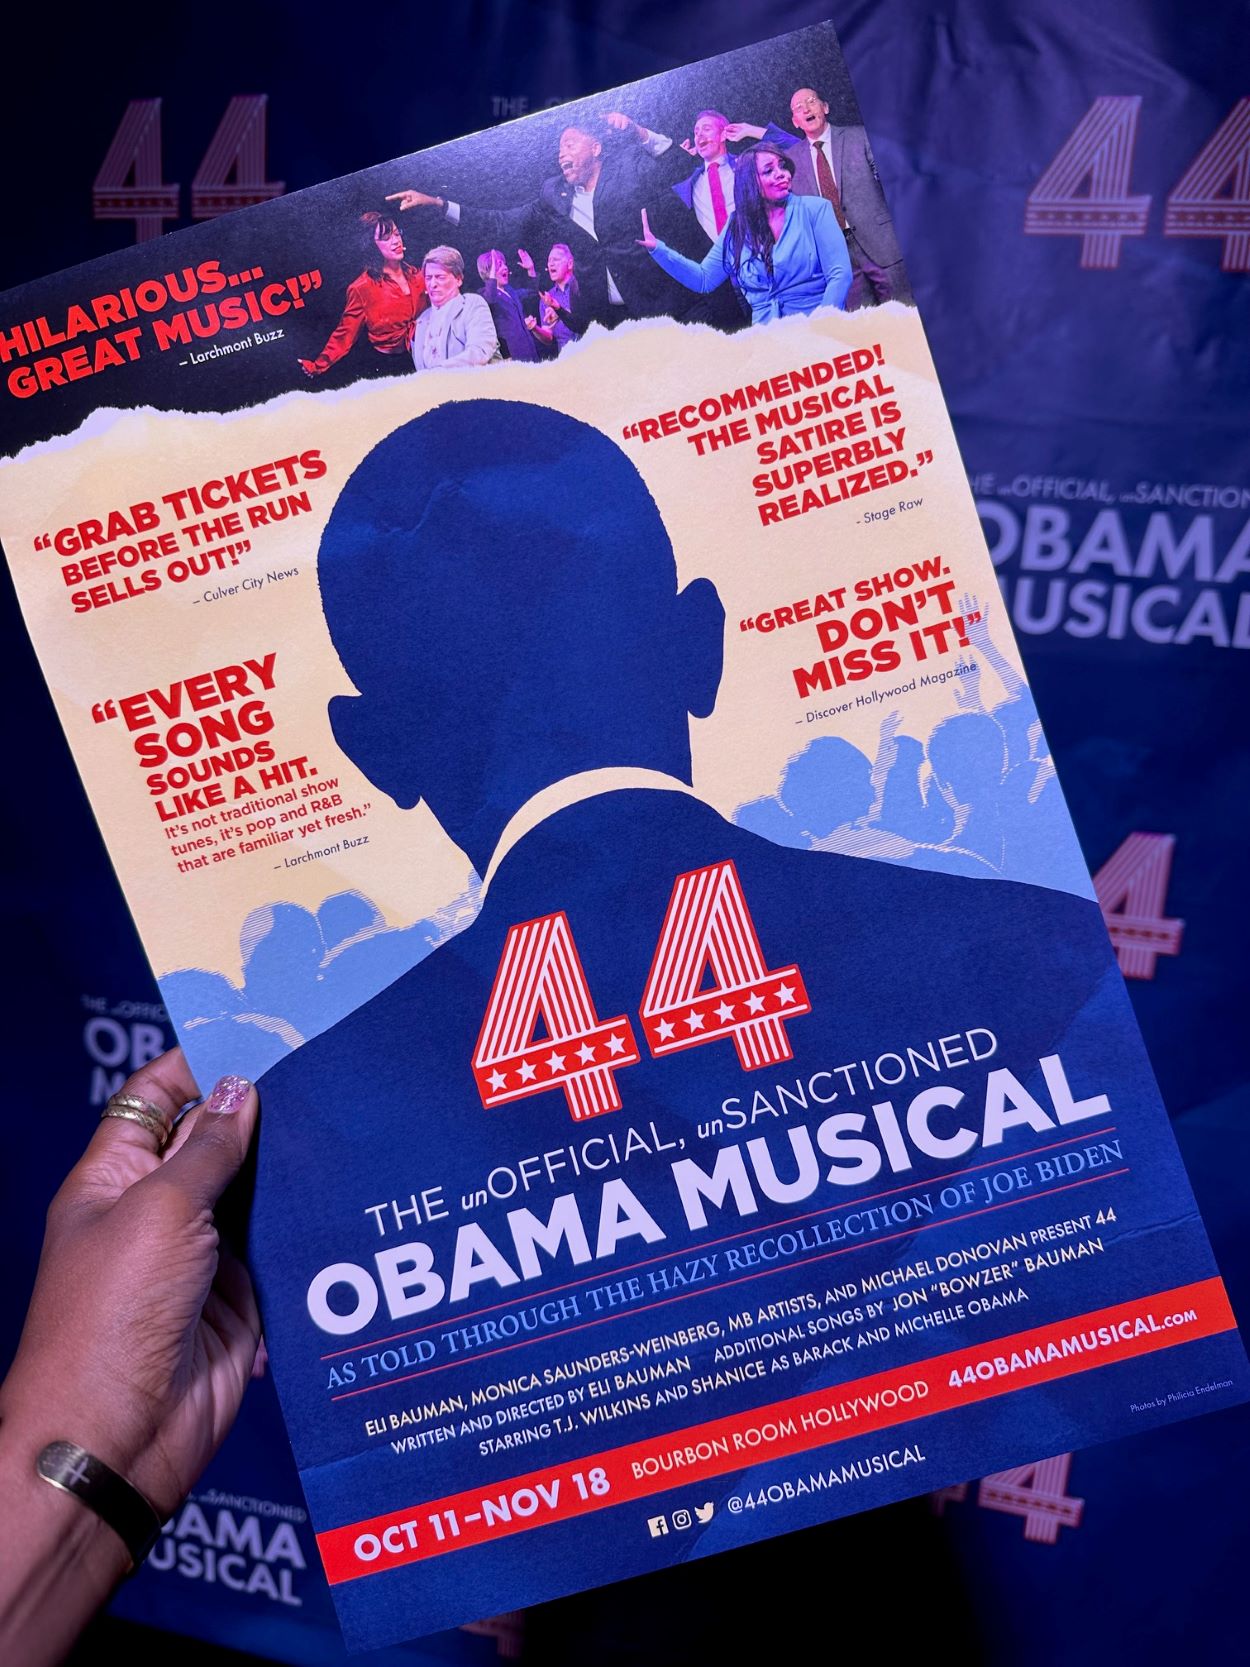 An image of the poster for the Obama musical, 44.